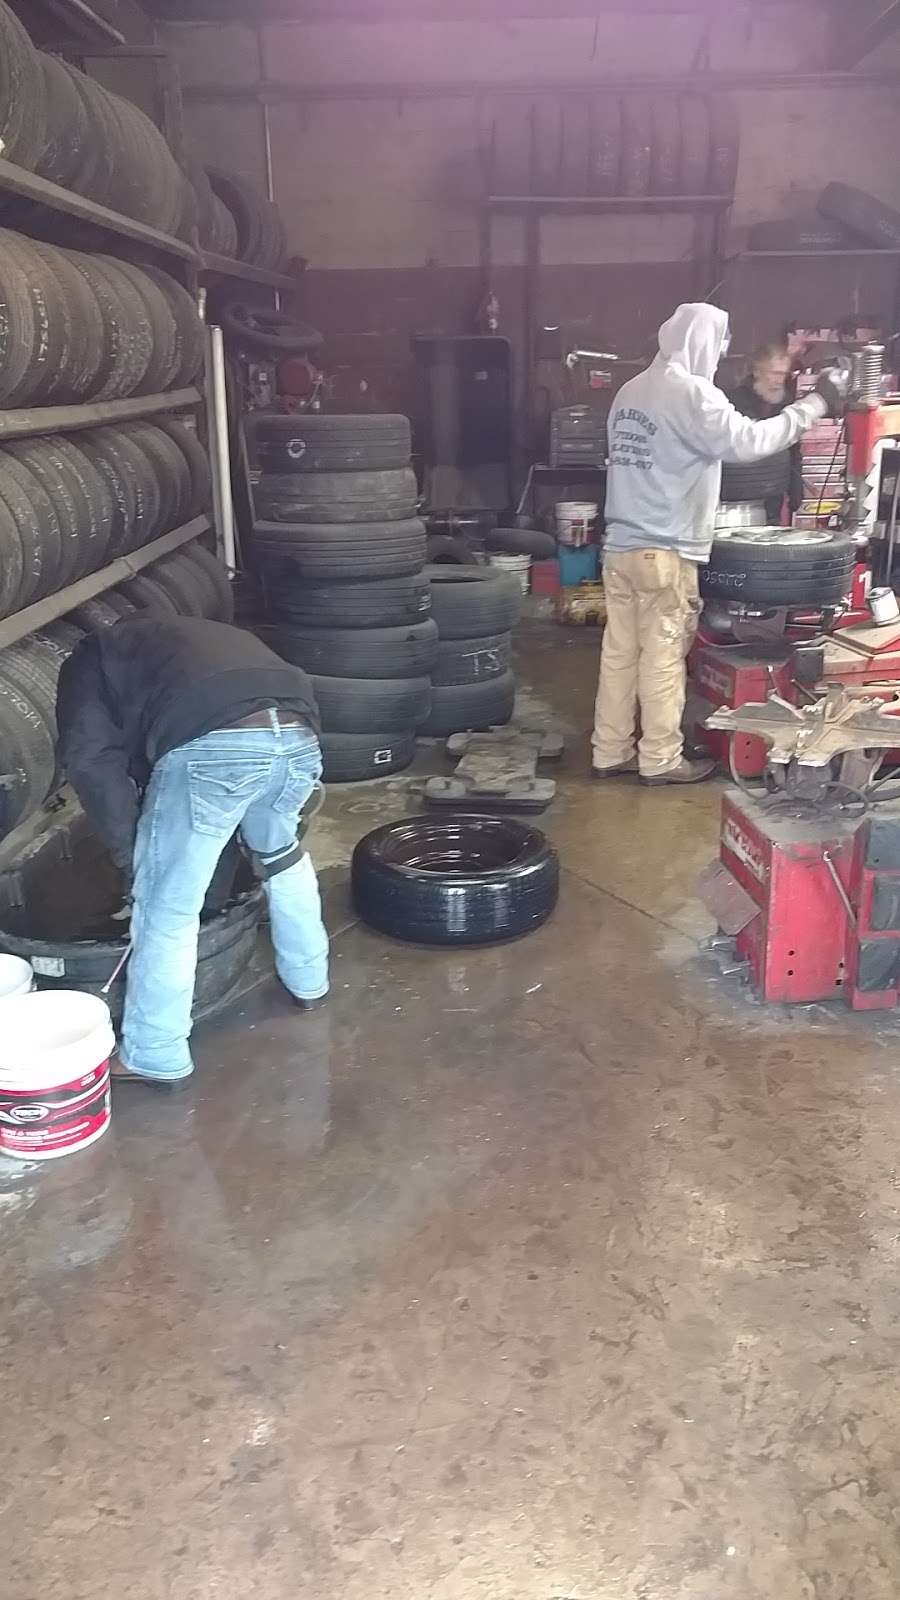 Poor Manns Tire | 2363, 5061 E 34th St, Indianapolis, IN 46218, USA | Phone: (317) 547-9676